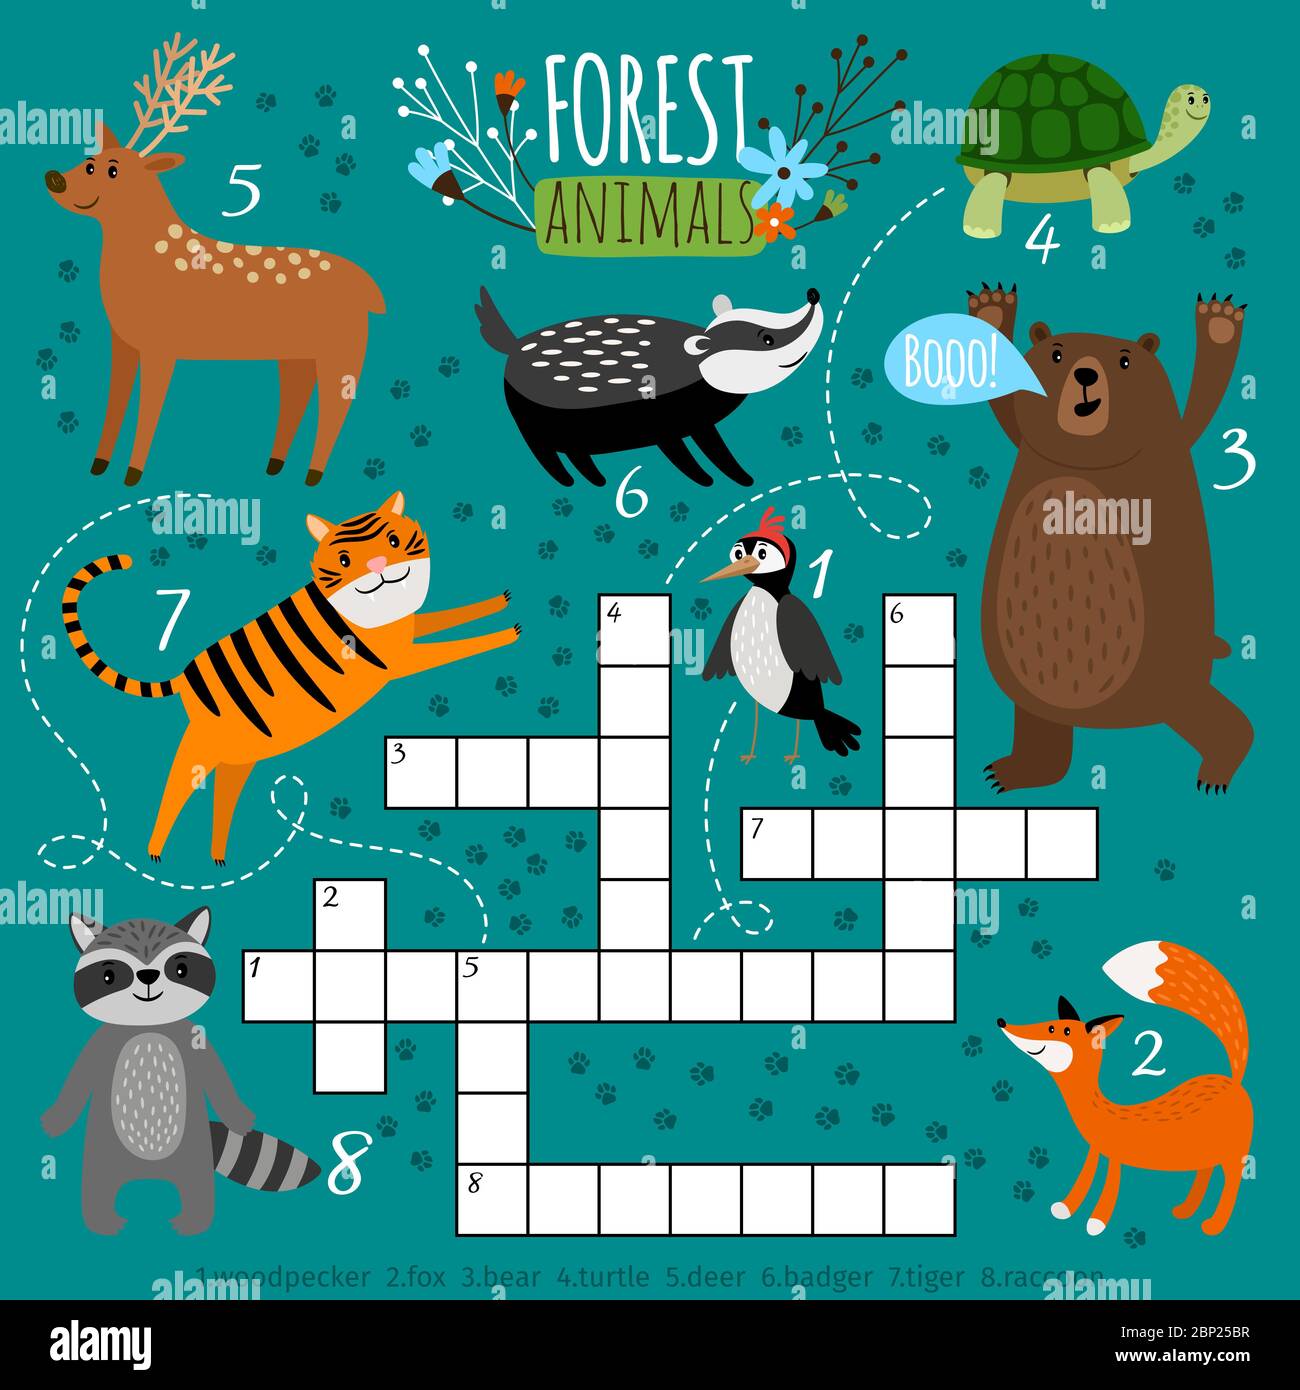 Printable animal crossword. Preschool puzzle quiz game, learning english  kids brainteaser with forest animals, vector illustration Stock Vector  Image & Art - Alamy